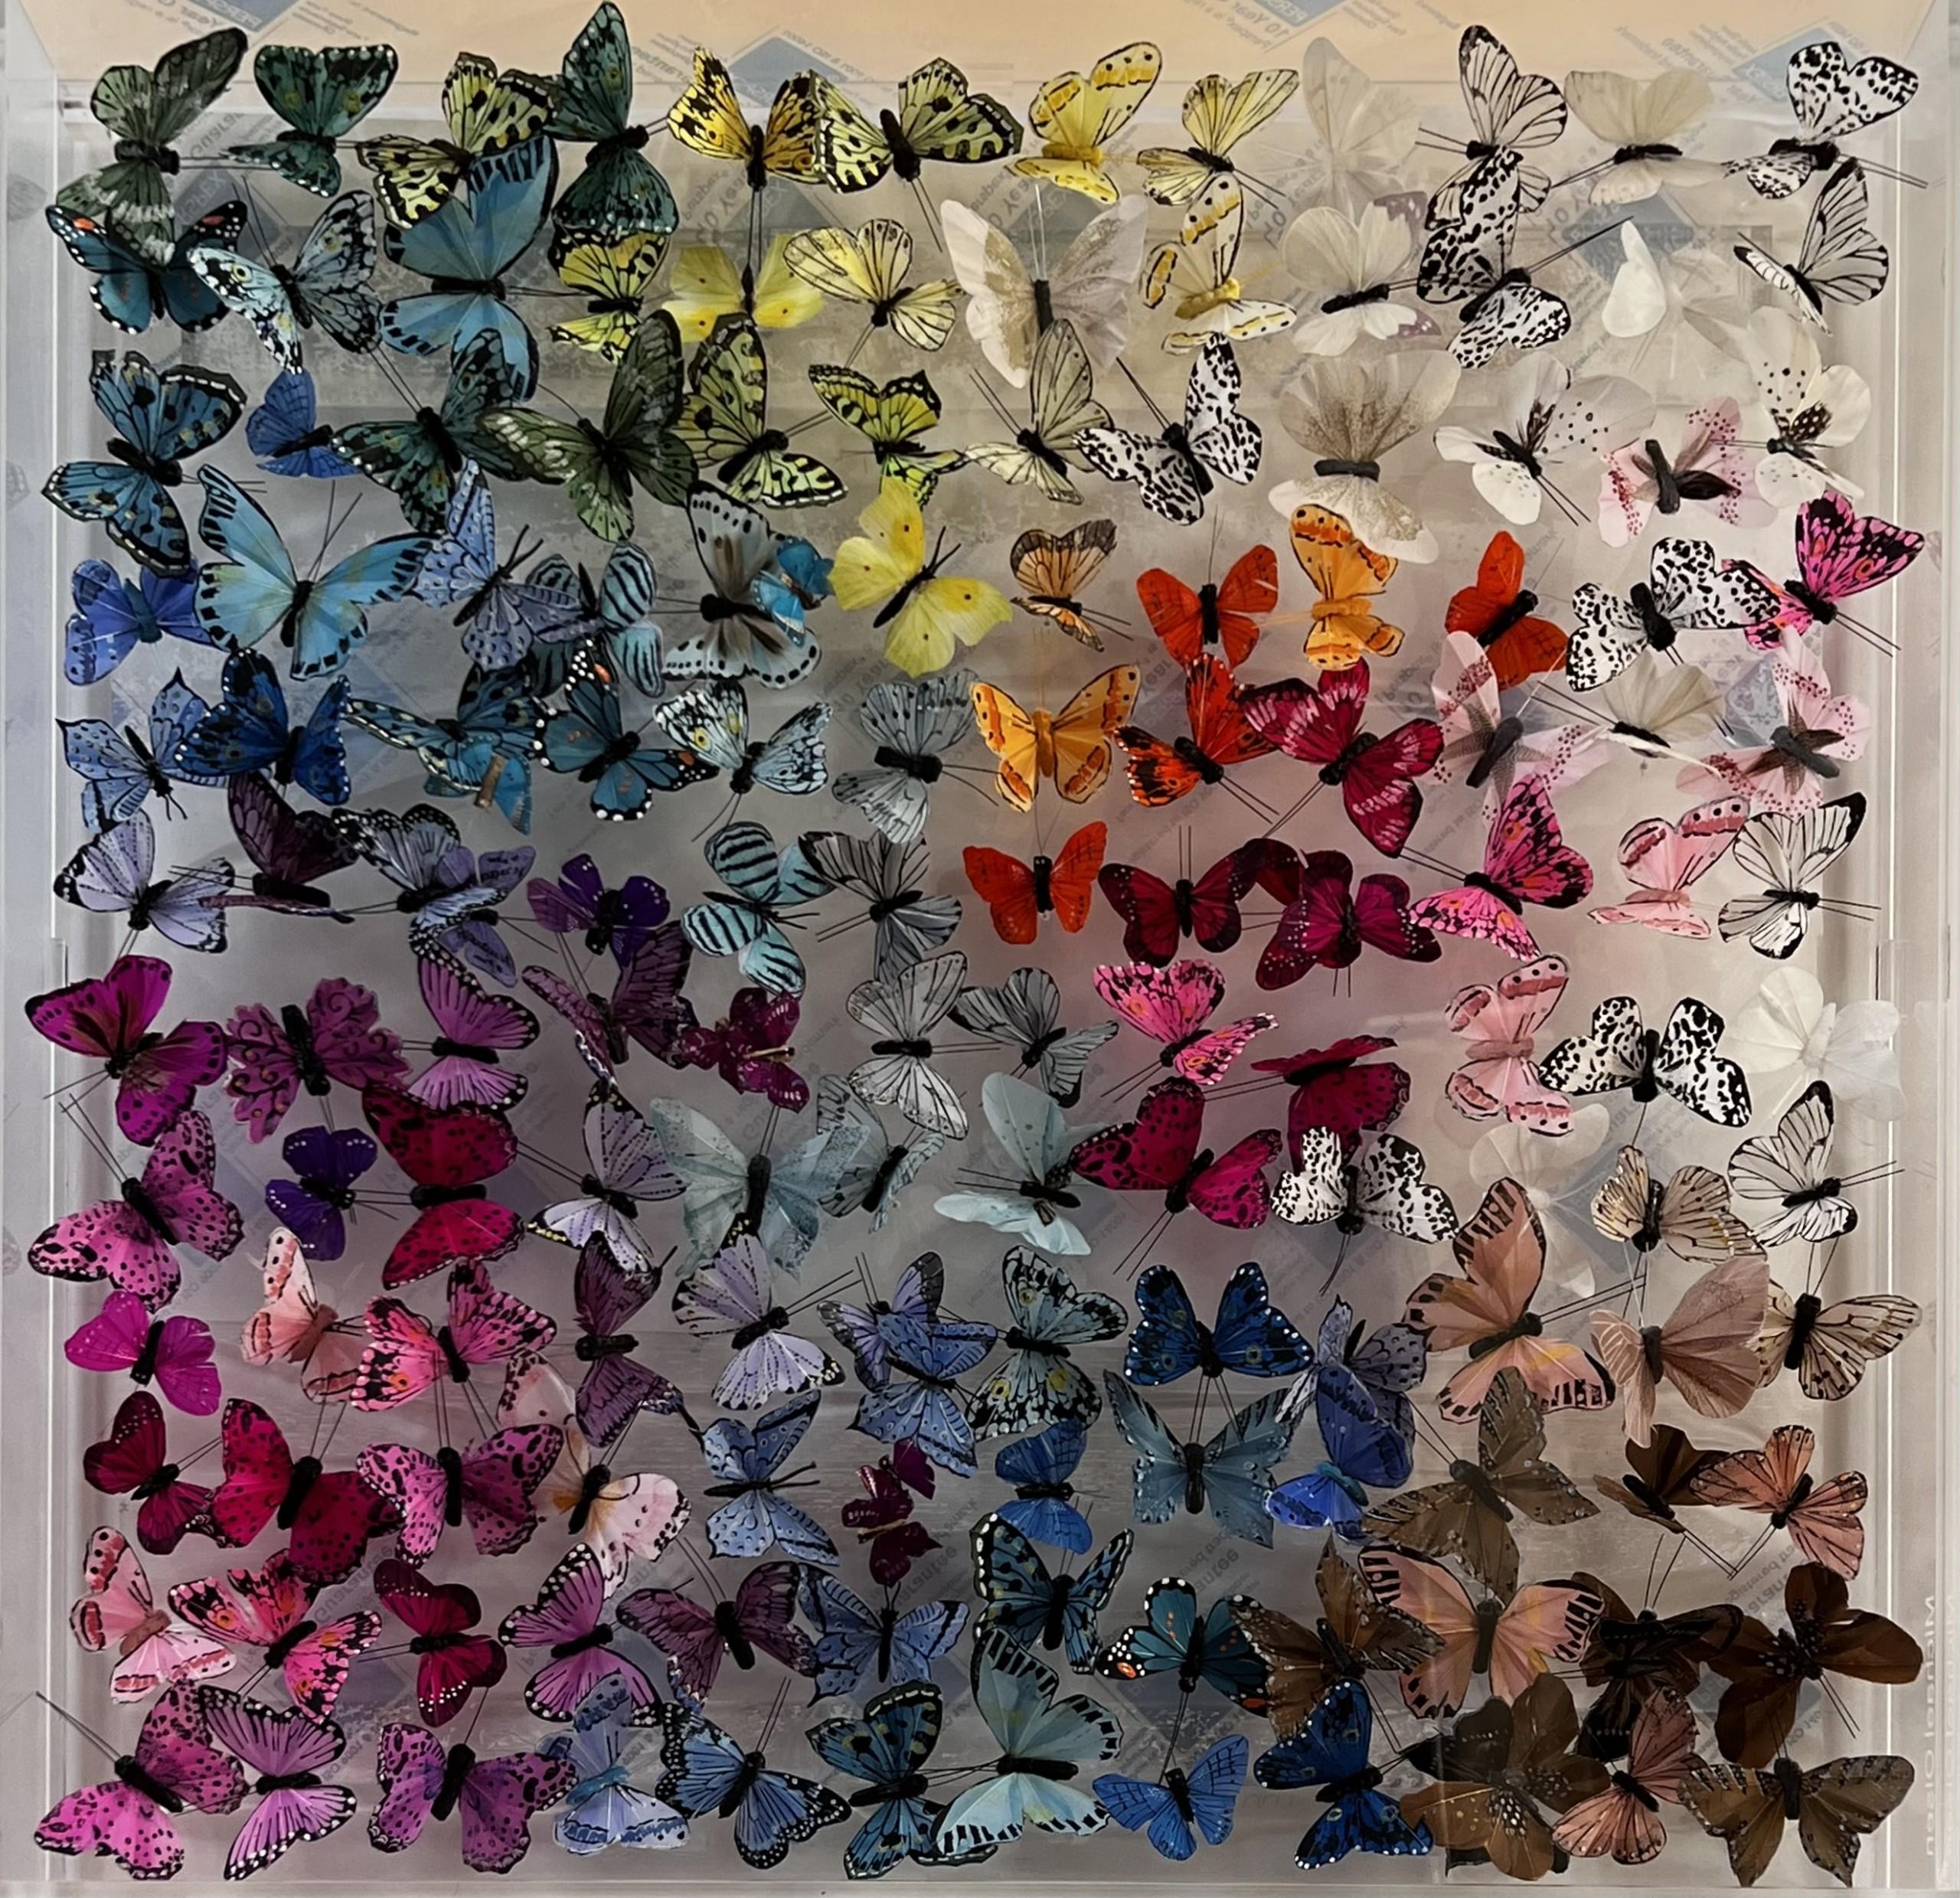 Wychwood White, Butterfly Artwork, 3D Contemporary Perspex Art, Statement Art